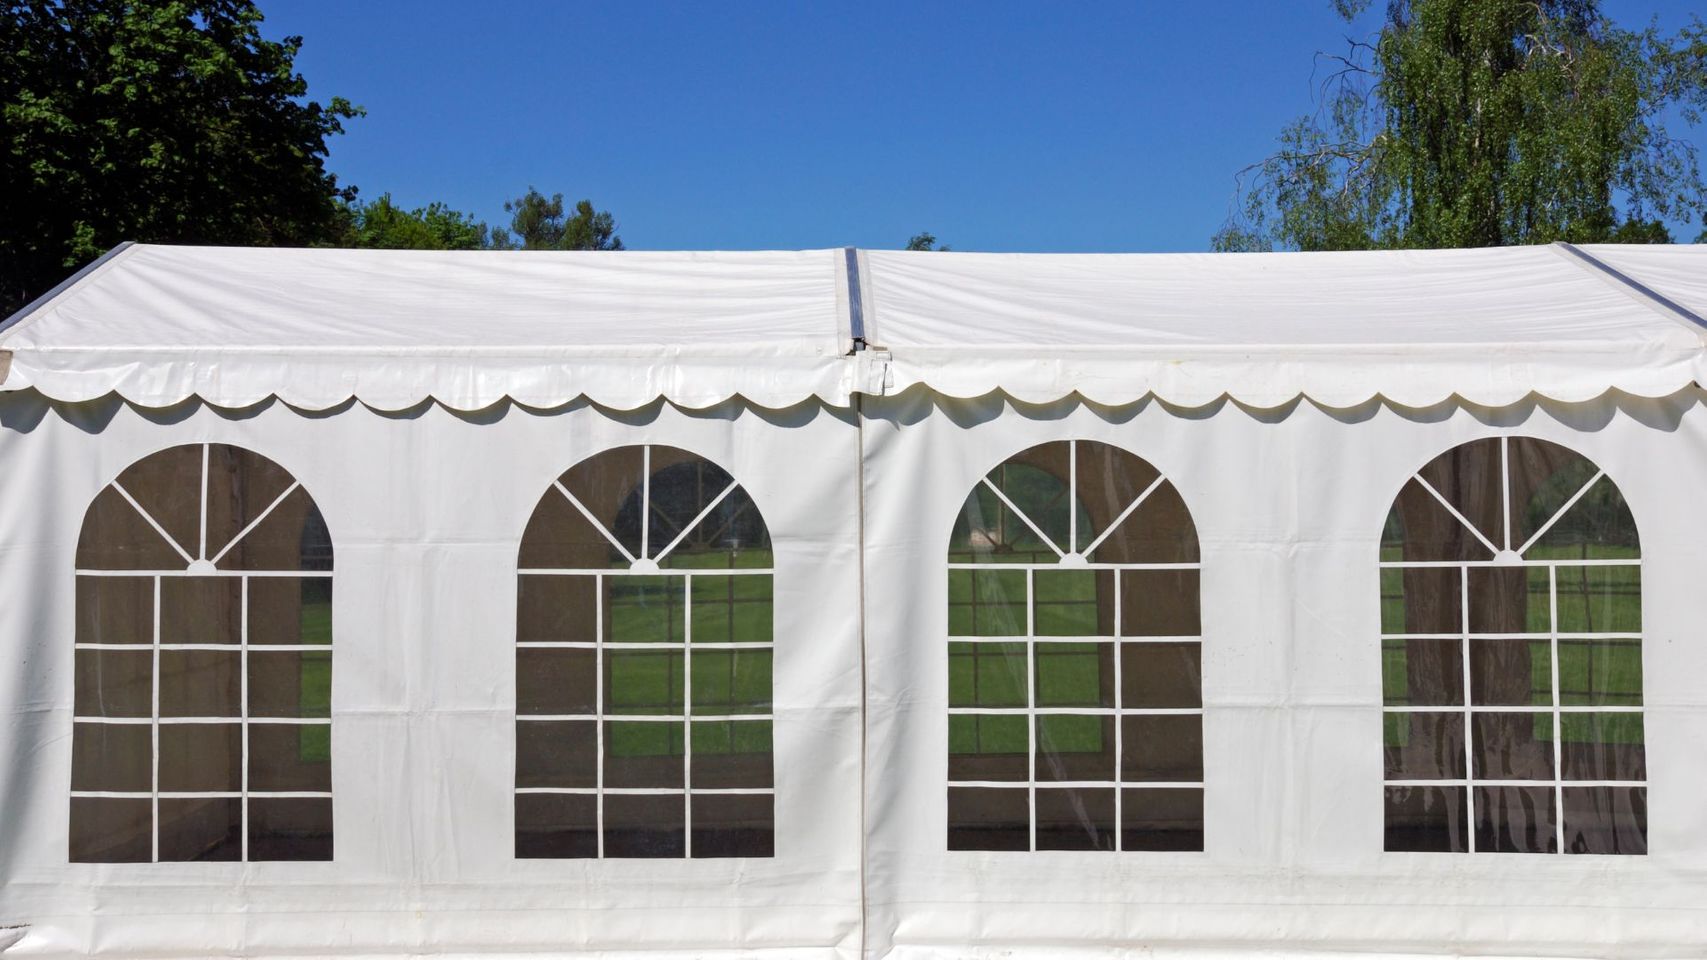 M25096 - Rent a Tent - Blog - 4 Events Where You'll Need a Tent.jpg